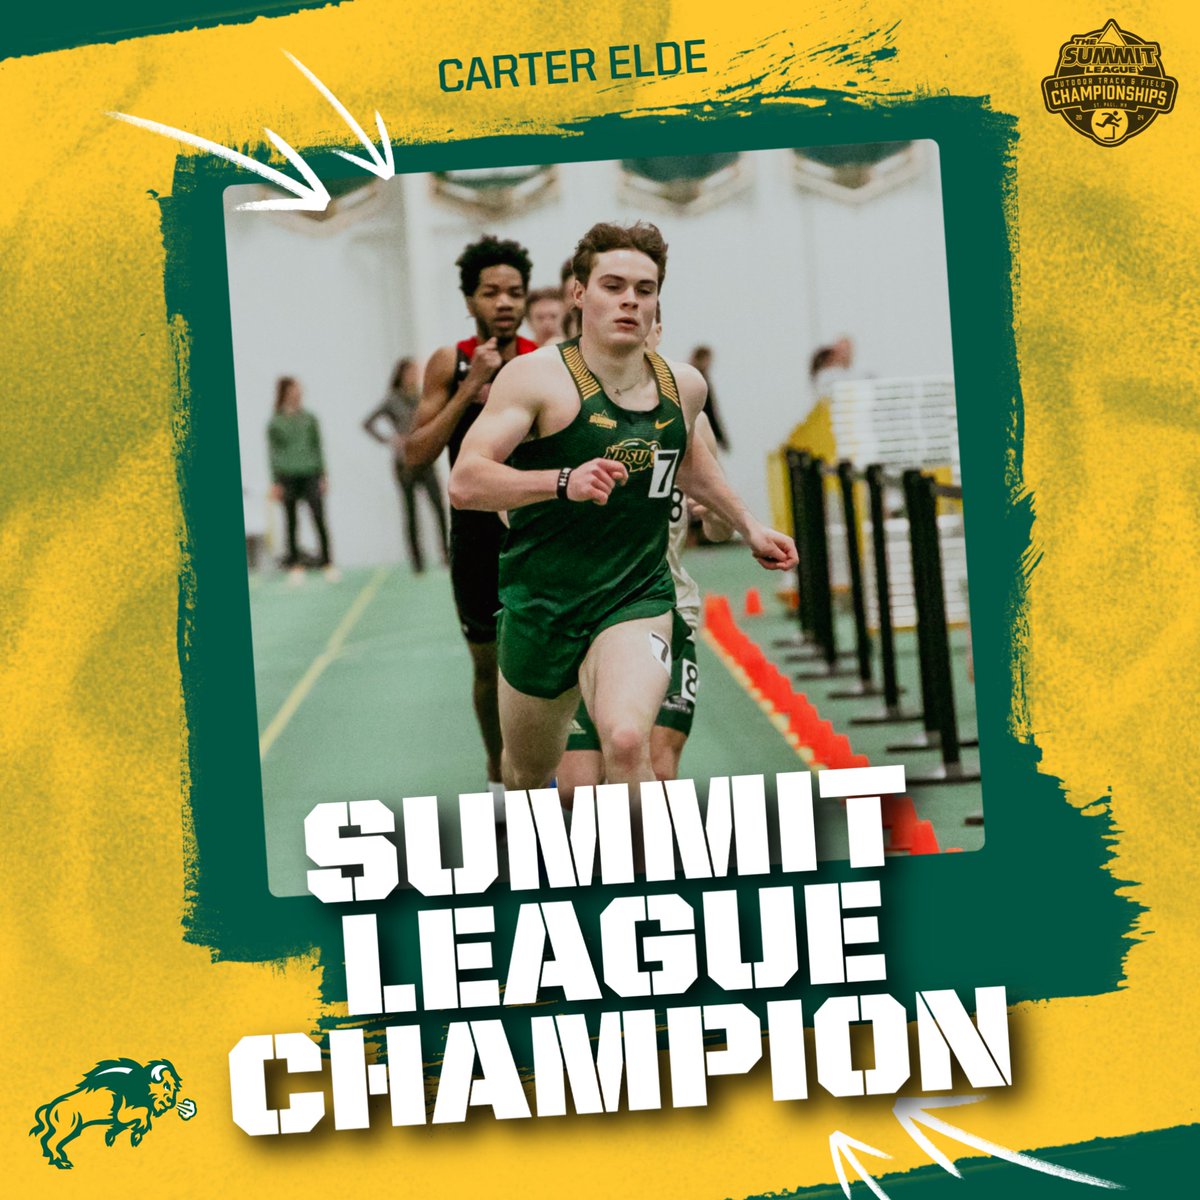 🥇 CHAMPION 🥇 Carter Elde wins the Summit League 400m hurdles title in a personal-best 52.75!